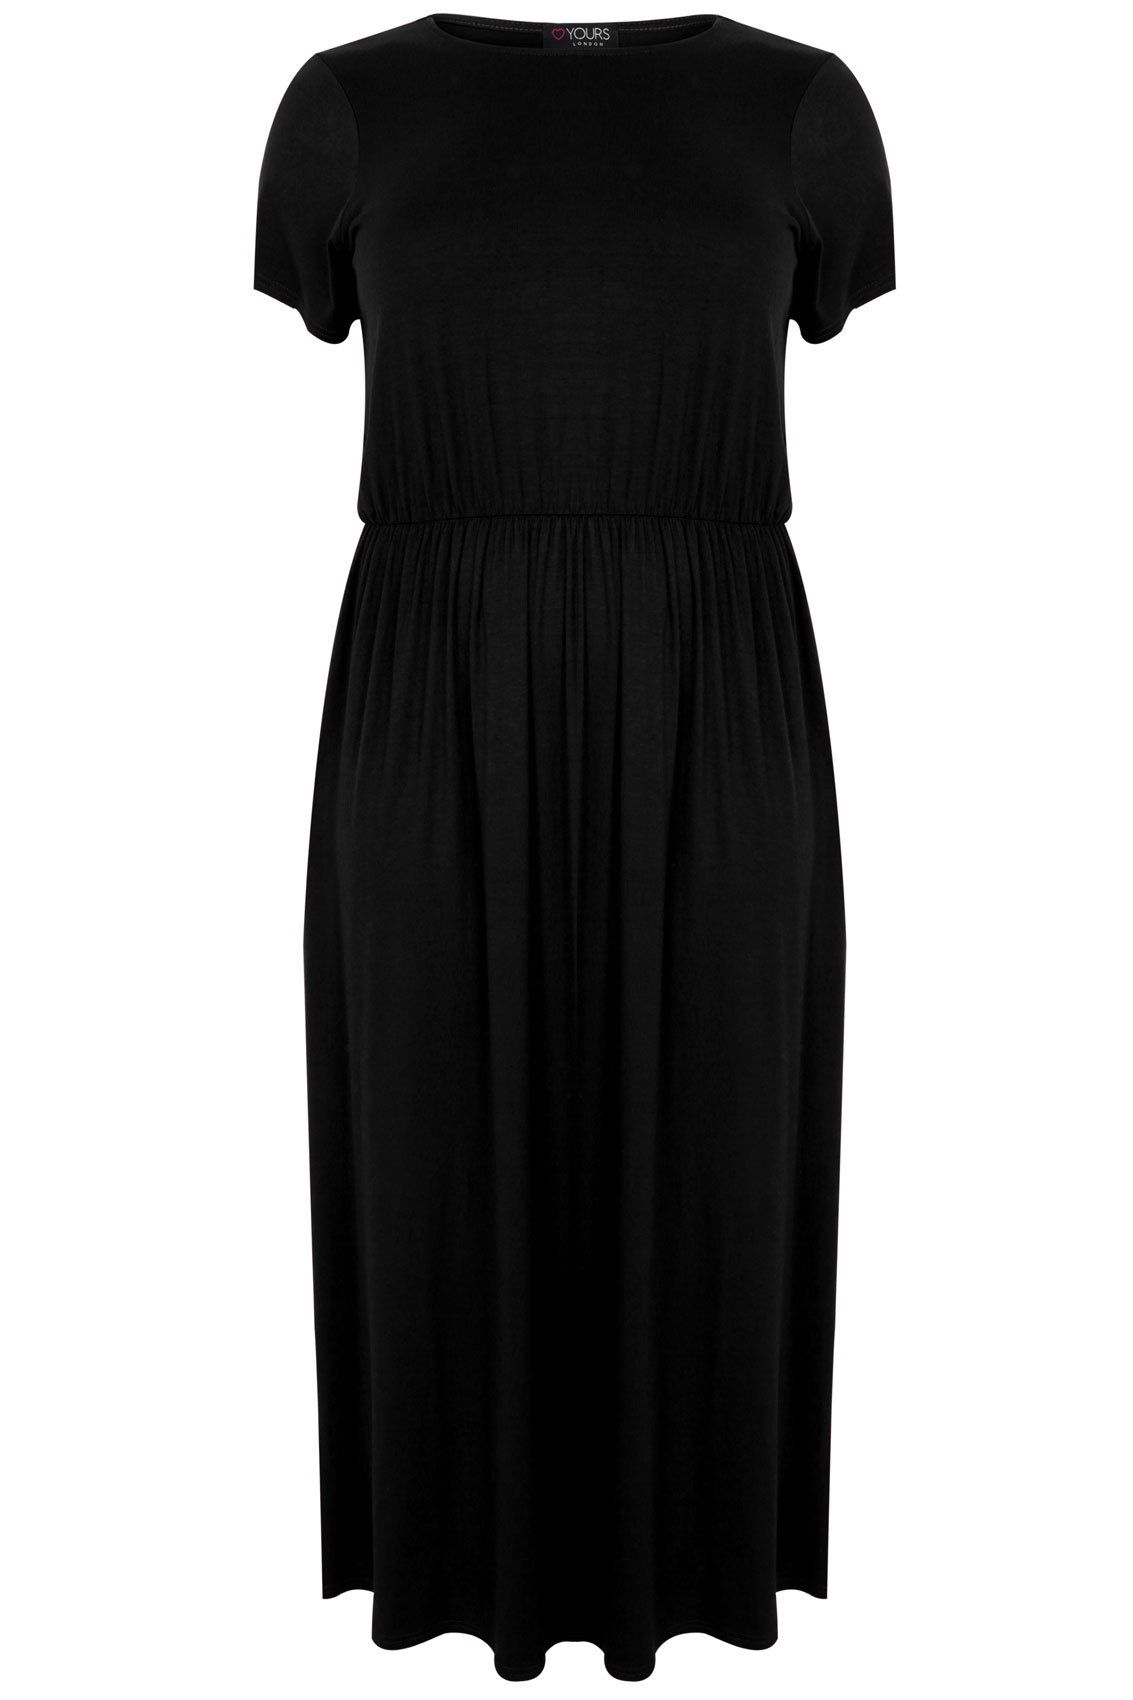 YOURS LONDON Black Maxi Dress With Elasticated Waist, plus Size 16 to 36